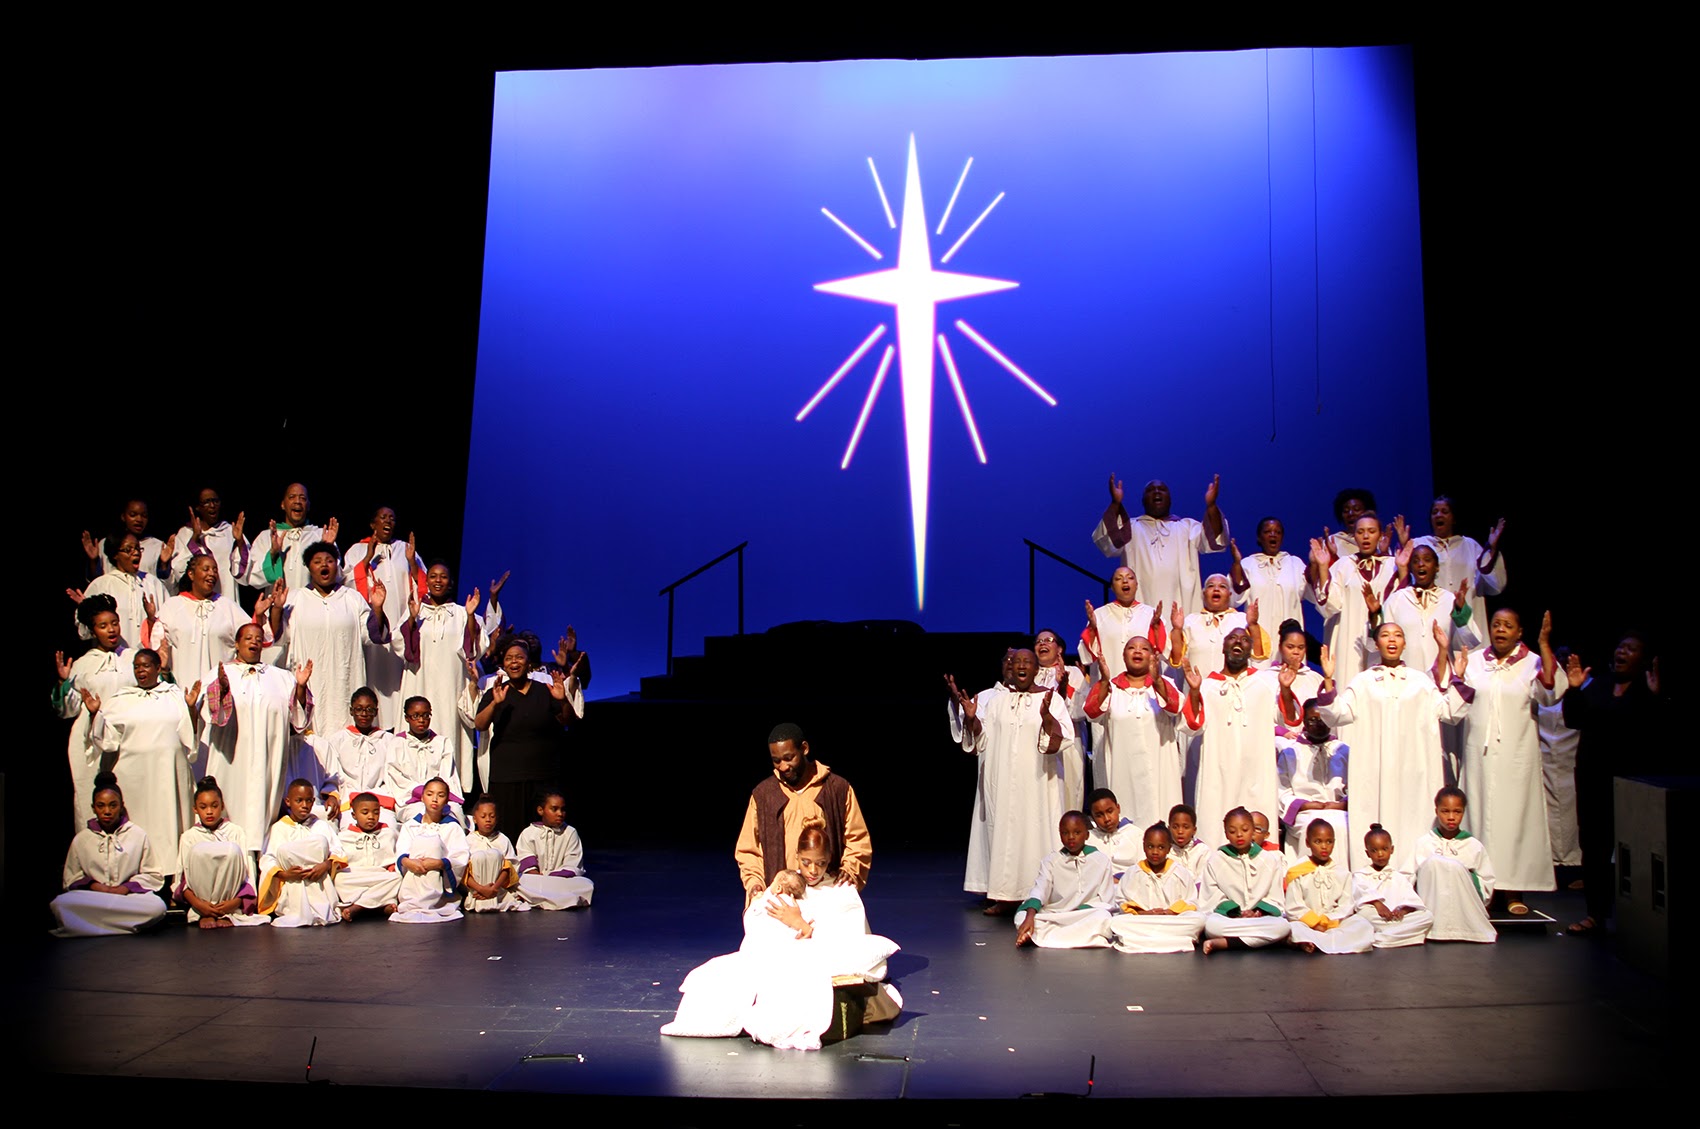 Photos Now In Its 46th Year, The LongestRunning 'Black Nativity